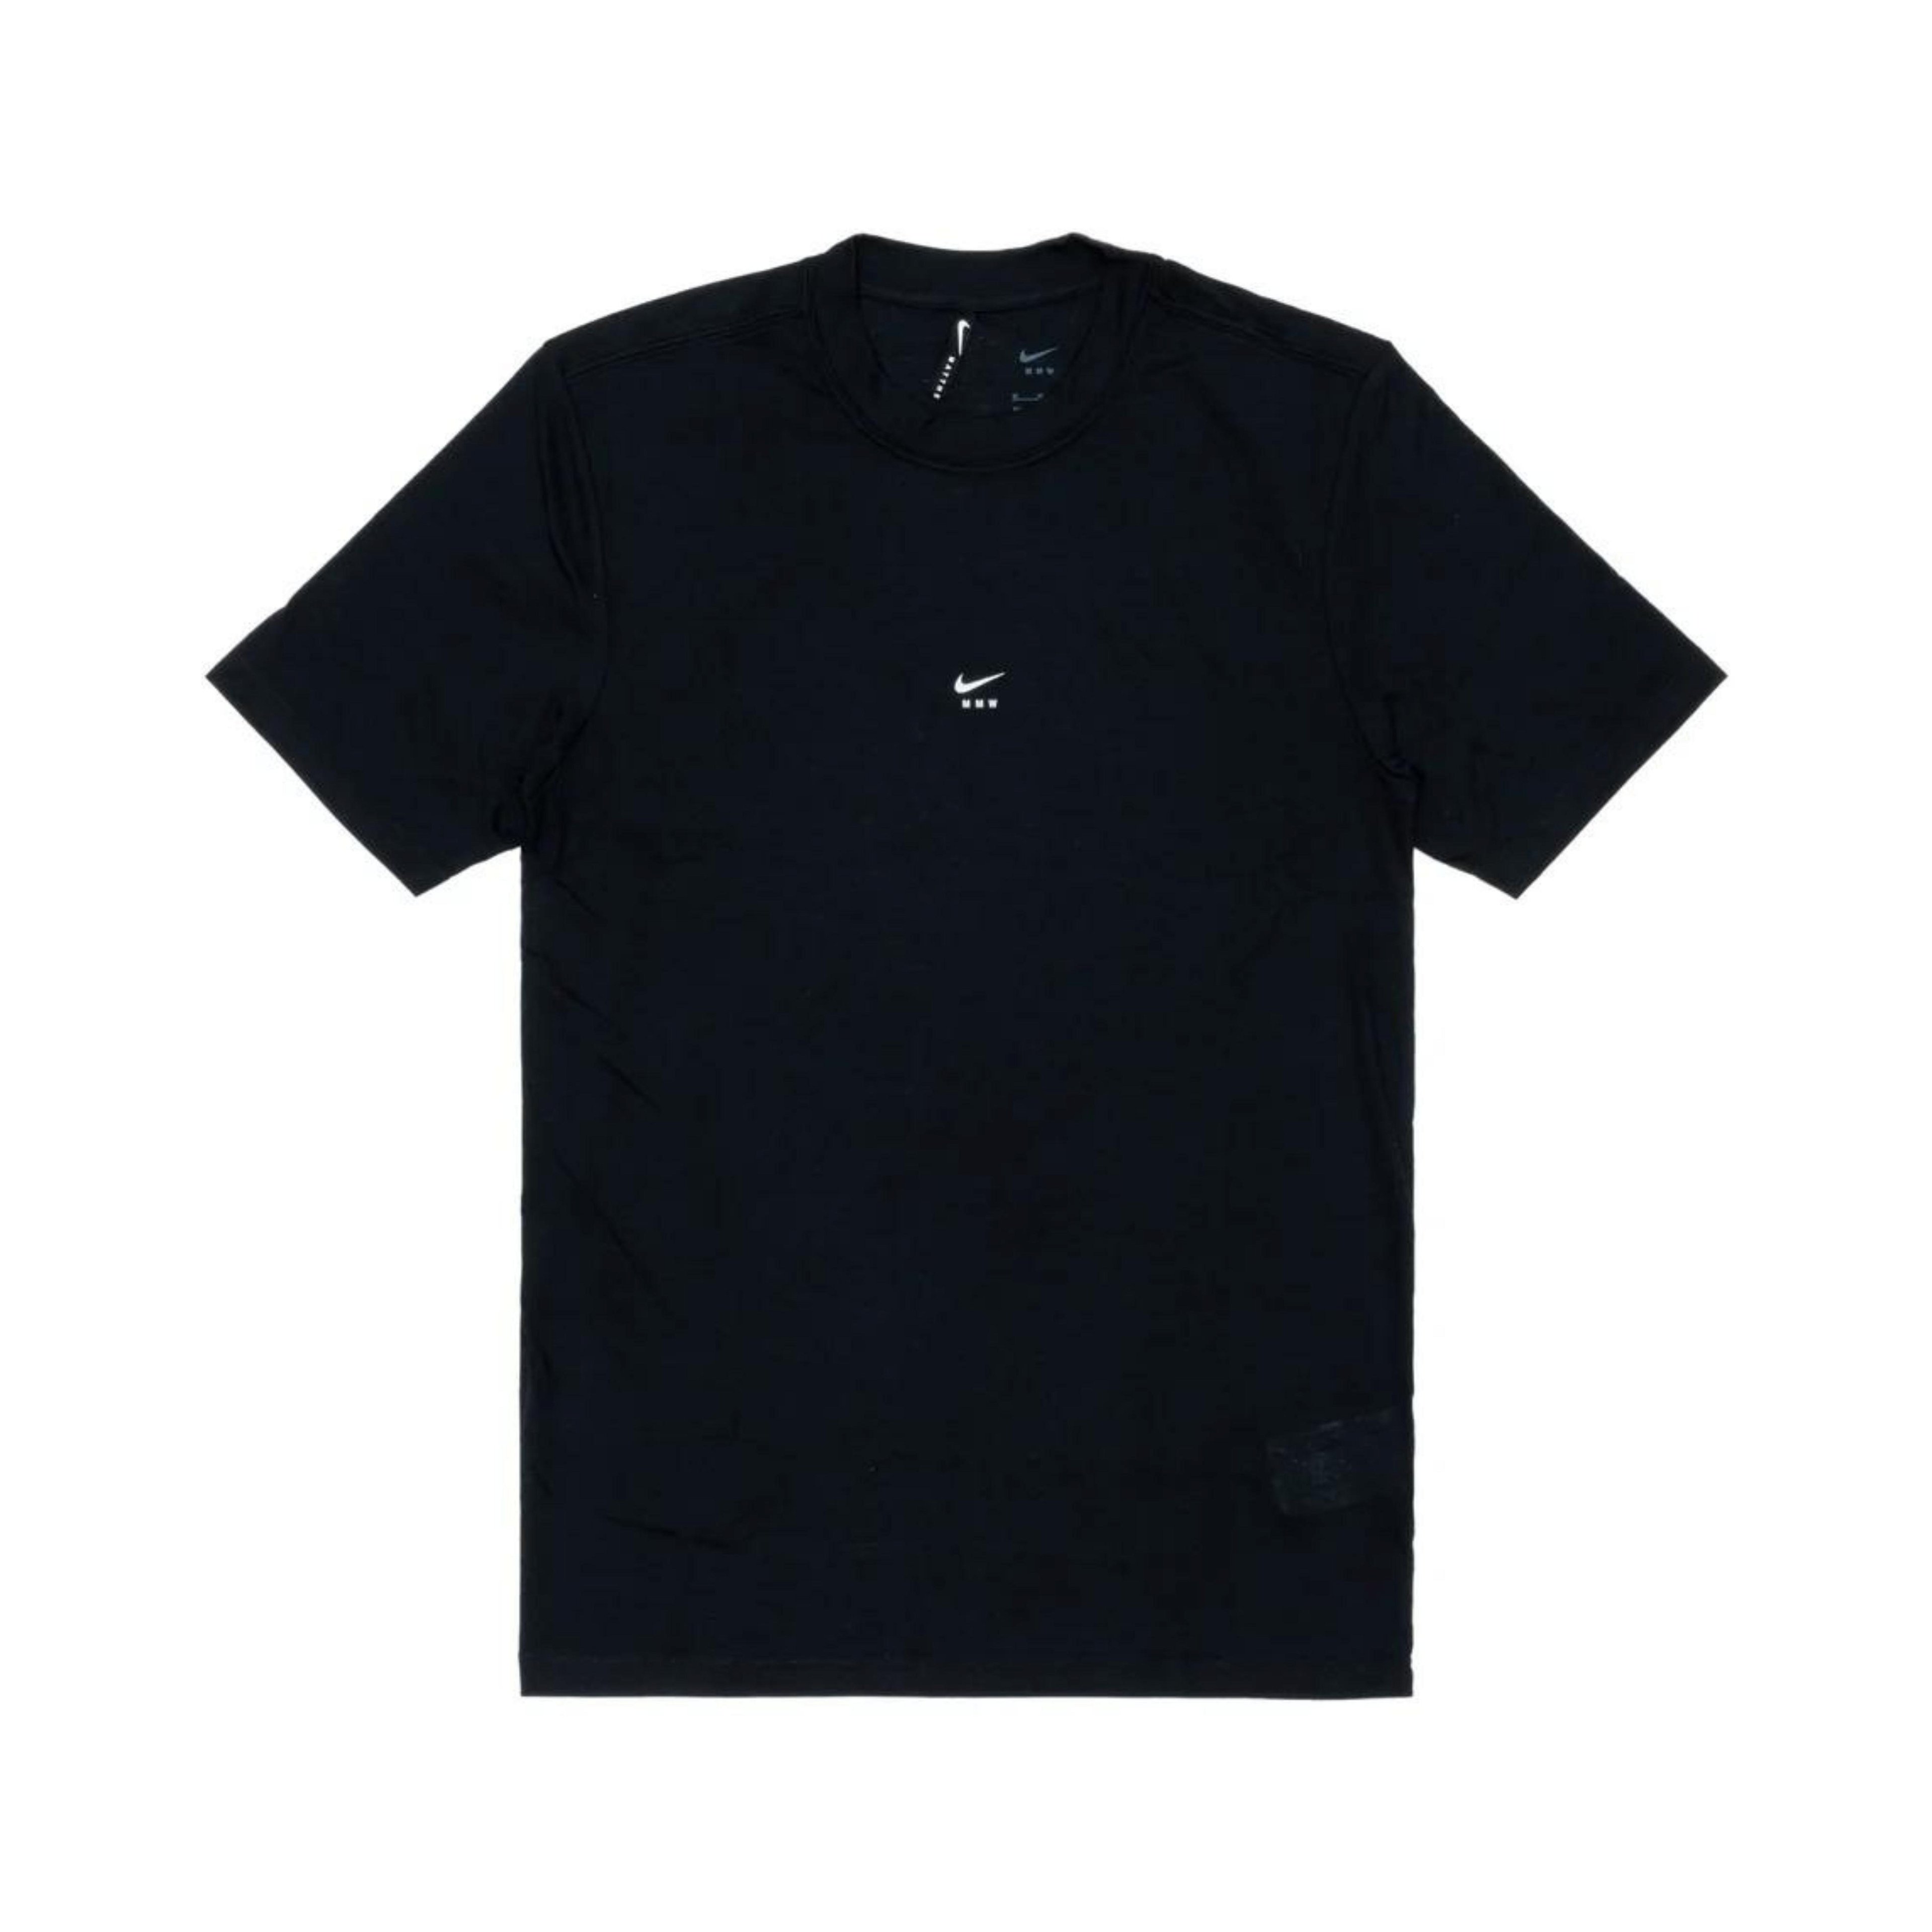 Nike - MMW Men's Short-Sleeve Top - (DR5356-010) by NIKE